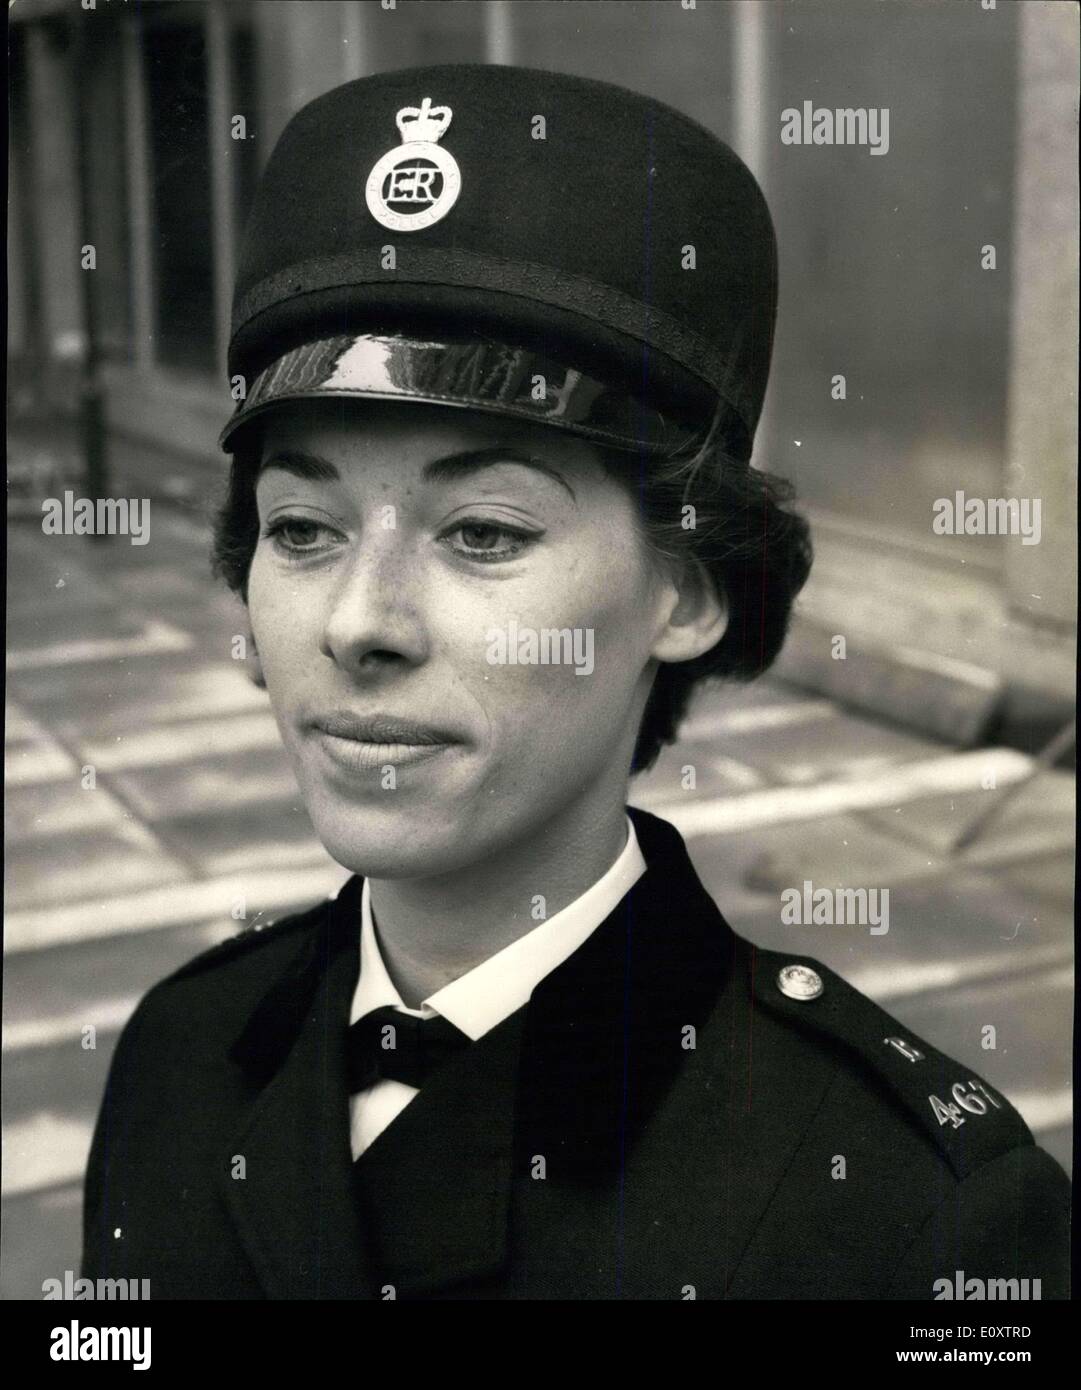 Sep. 14, 1967 - New Uniform For London Policewomen. The hall-mark of Mr. Norman Hartnell's design for the new uniform to be worn by the women of the Metropolitan police is its combination of elegance and comfort with utility. He has managed to accomplish this while maintaining the necessary aspect of legal authority in a less military ad more feminine style. The cloak to be worn in place of the great coat adds an imaginative touch and the new cap designed by Mme. Simone Mirman completes the fashionable picture of the modern, efficient woman of the Metropolitan Polices. Photo Shows: W.P Stock Photo